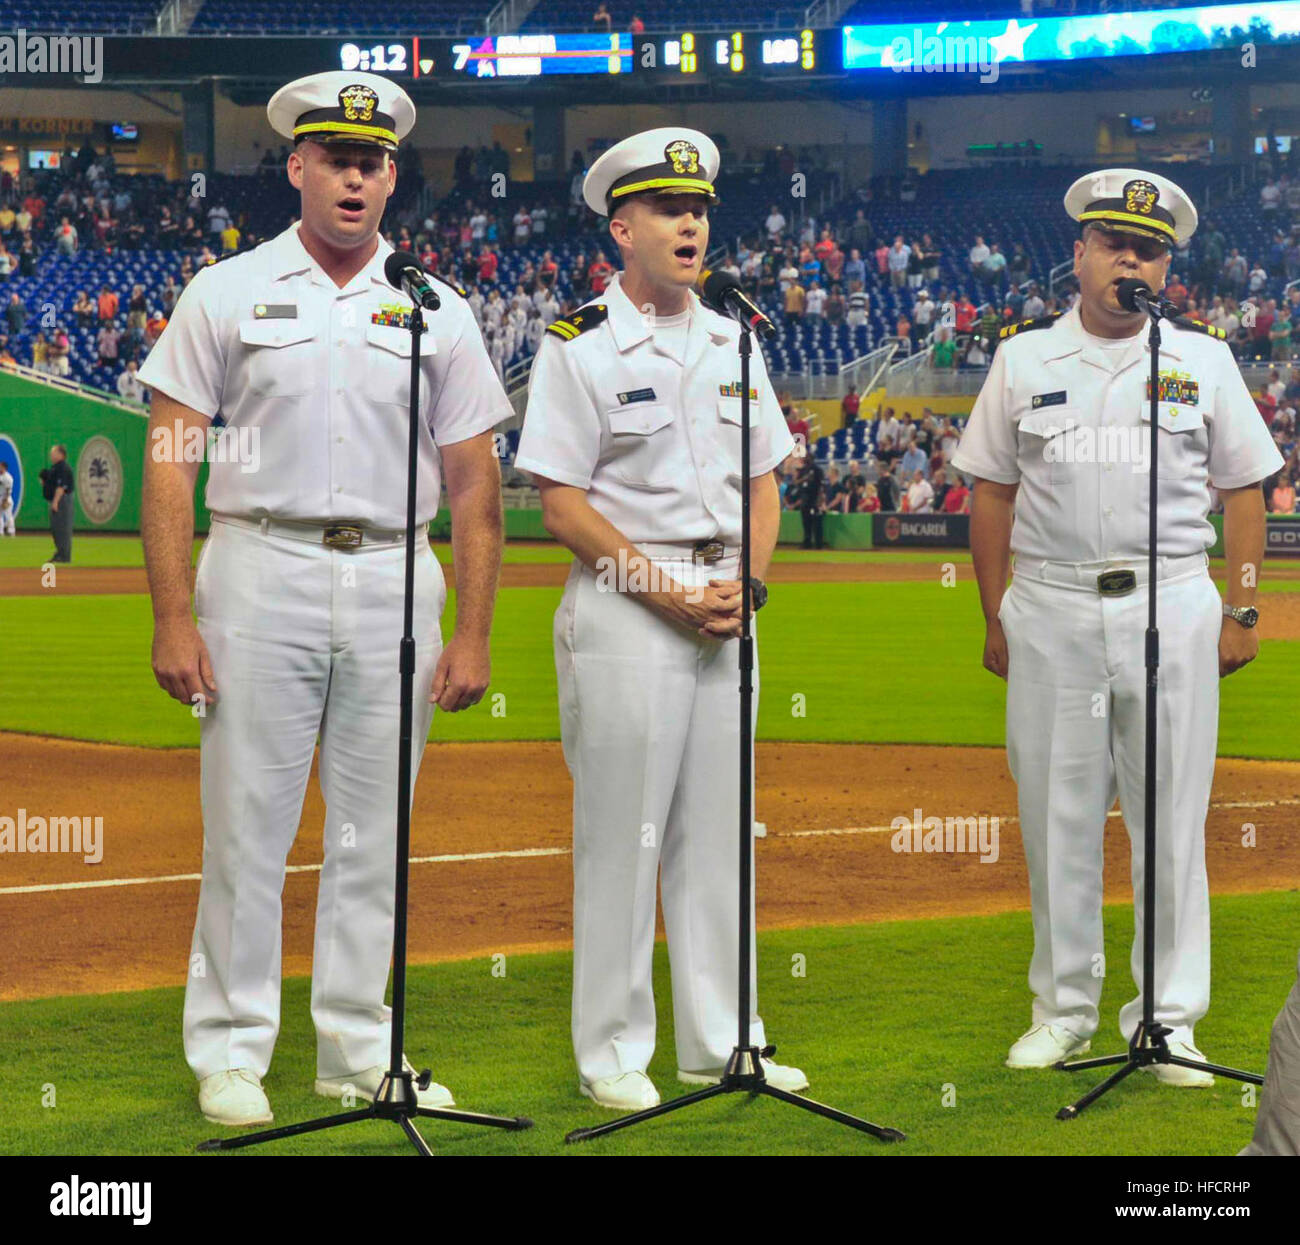 Ensign Christopher Boniwell, left, Lt. Justin Bernard, middle, and Lt. Joel Lopez, right, from the amphibious transport dock ship USS New York (LPD 21) sing 'God Bless America' during Military Appreciation Night at Marlins Park as part of Fleet Week Port Everglades. This is the 24th annual Fleet Week in Port Everglades, South Florida's annual celebration of the maritime services. (U.S. Navy photo by Mass Communication Specialist 2nd Class Cyrus Roson/Released) Port Everglades Fleet Week 2014 140430-N-YO707-509 Stock Photo